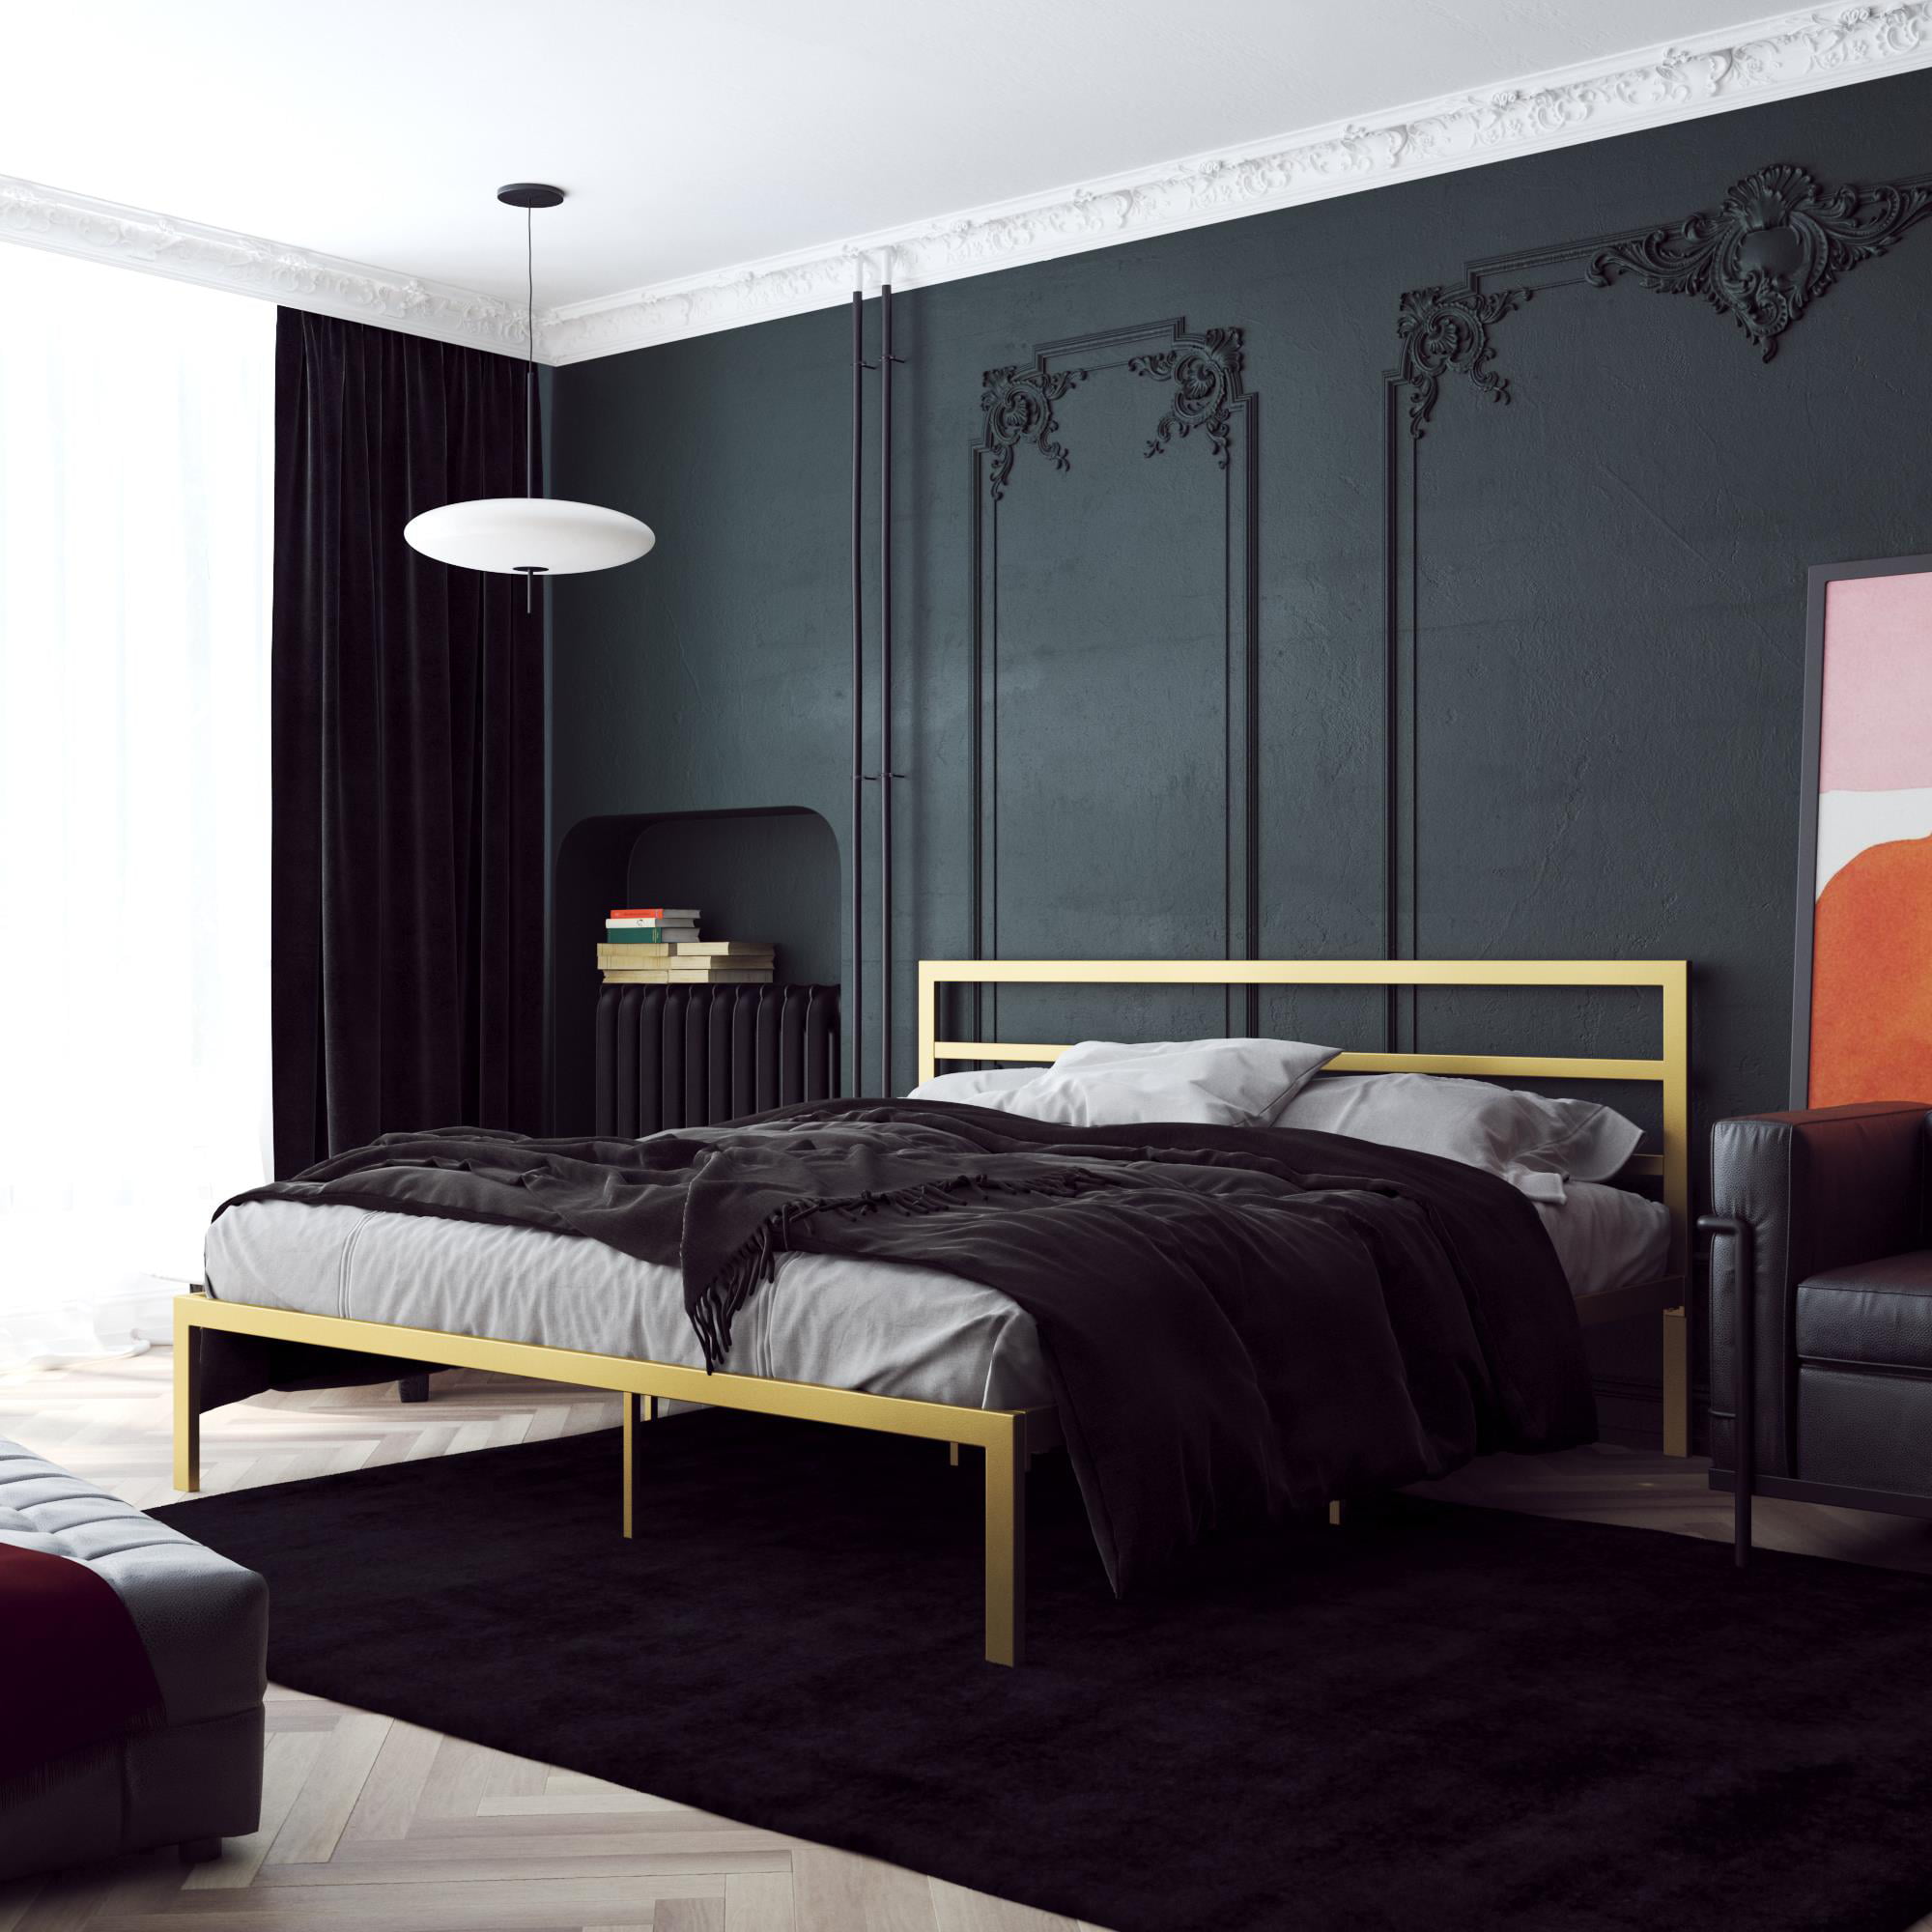 Minimalist Metal Bed Frames For A Modern Look